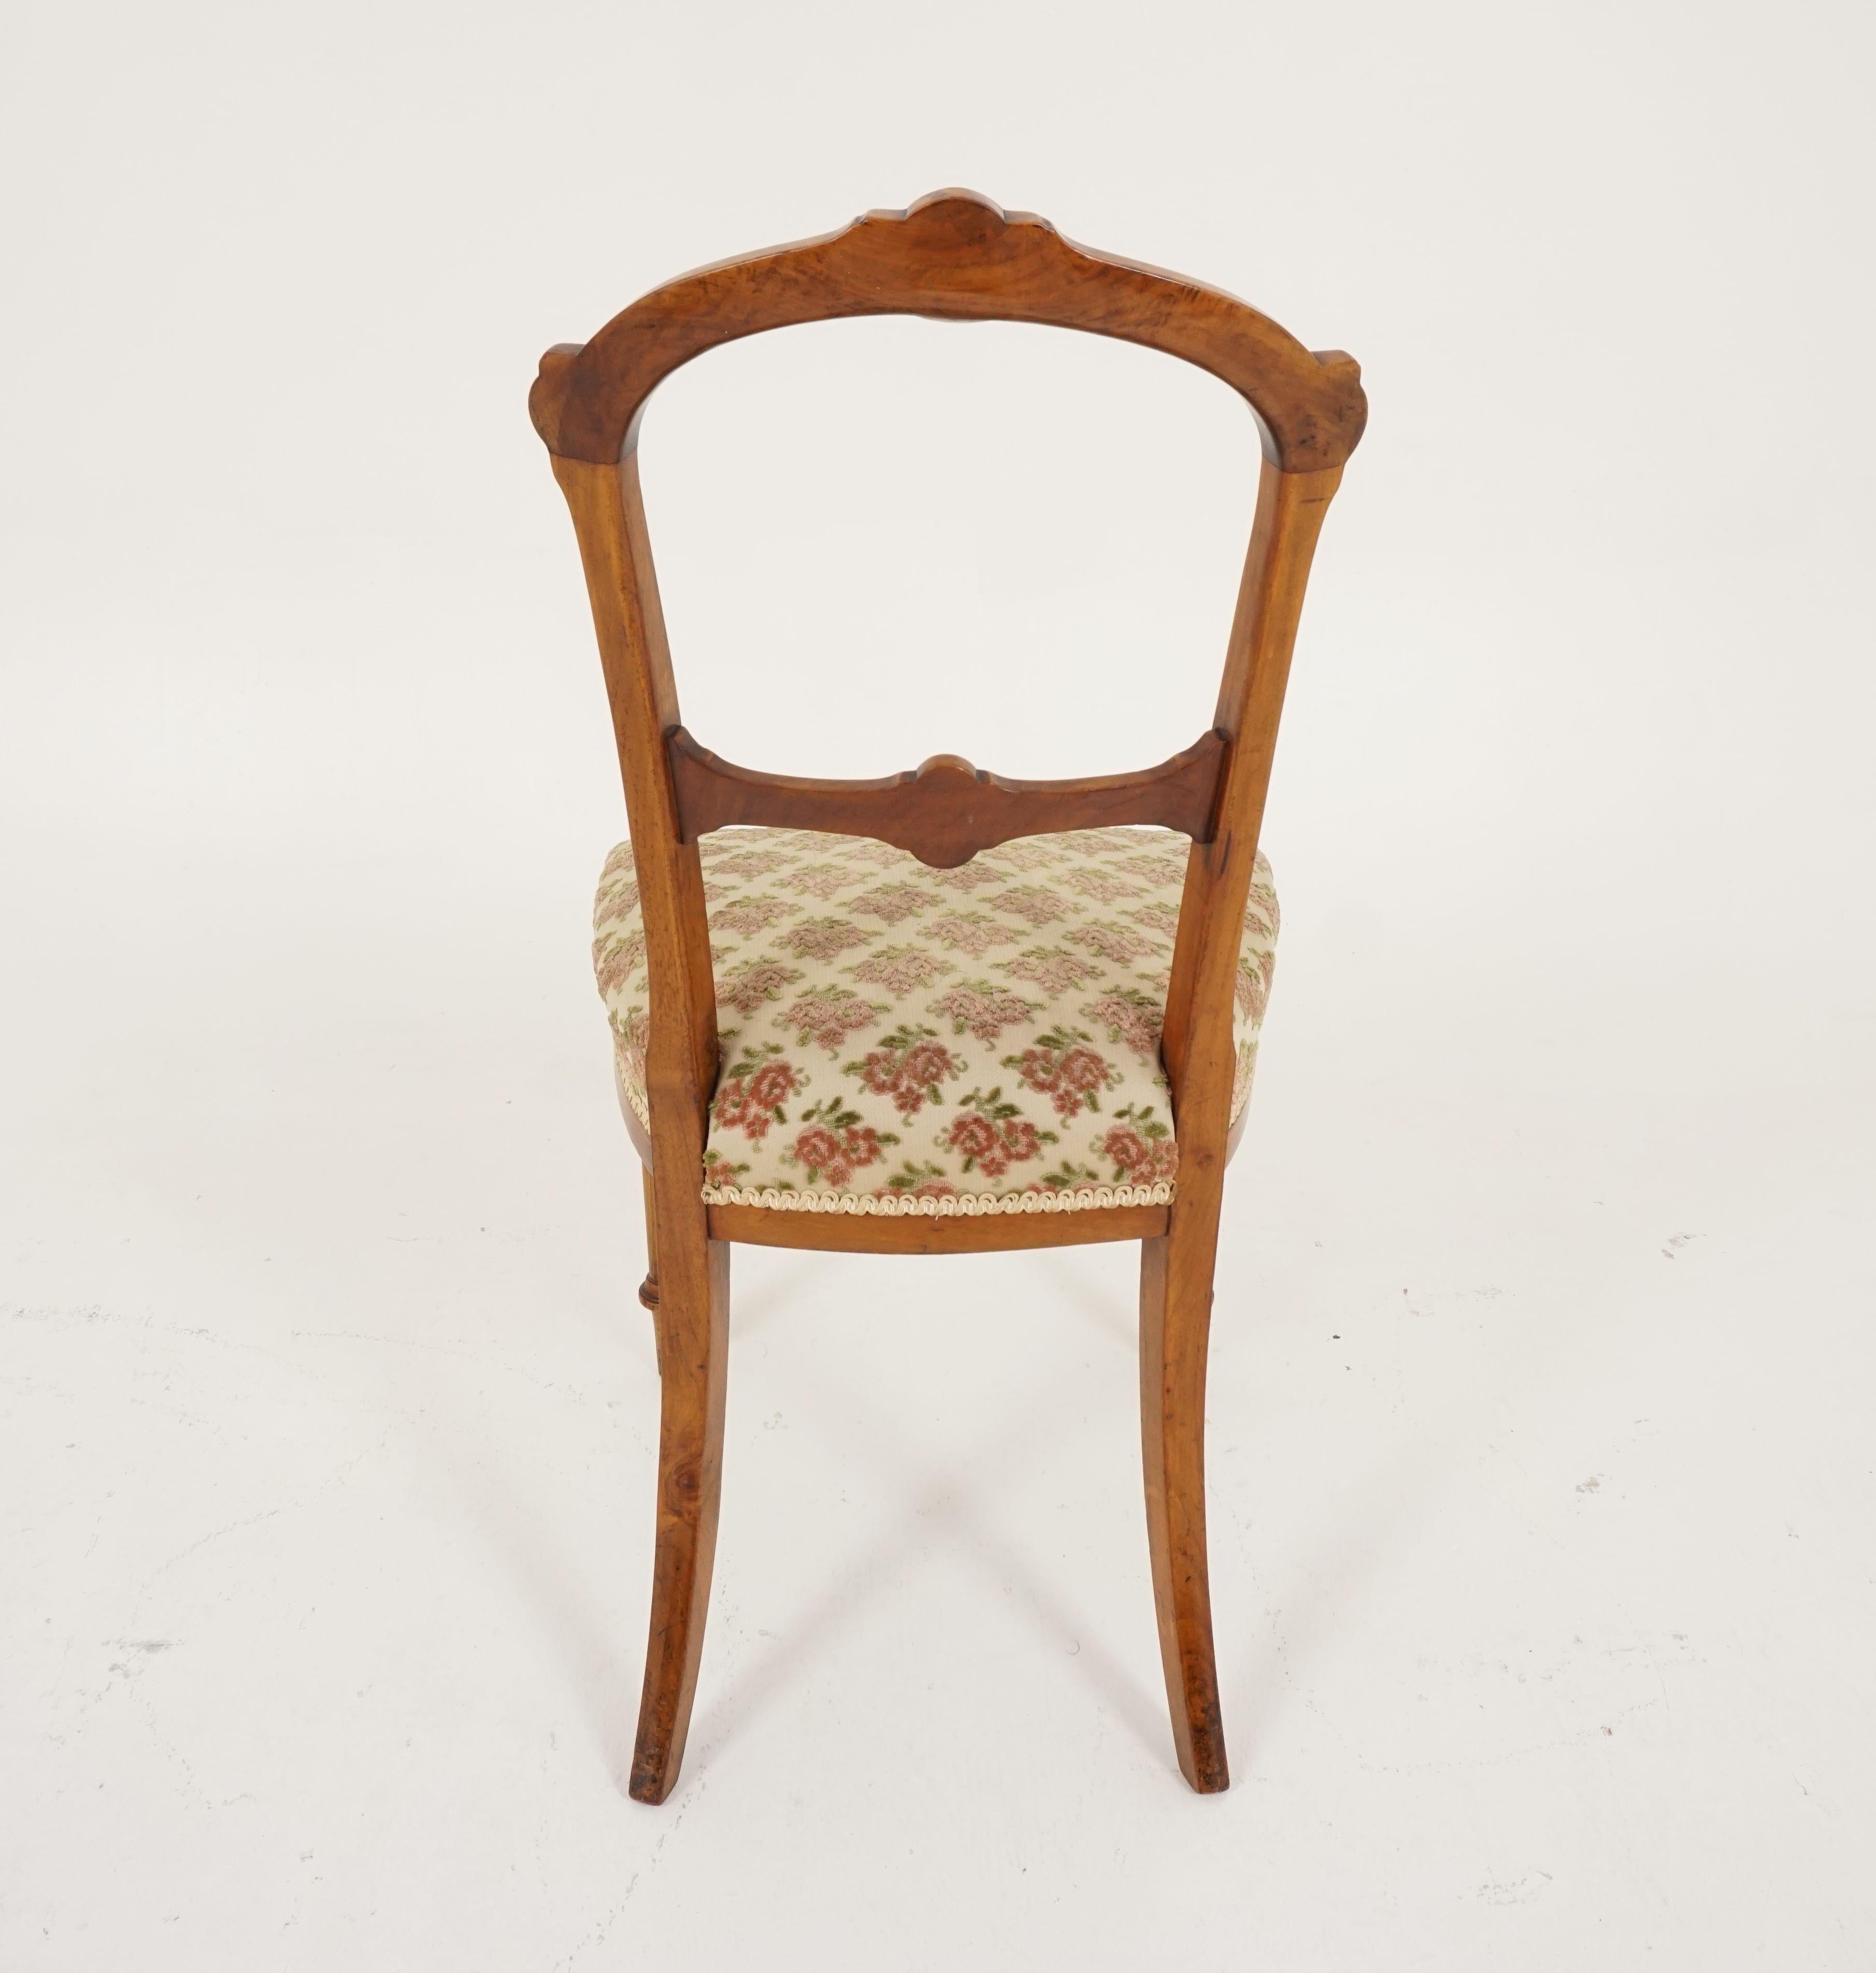 Hand-Crafted Antique Inlaid Walnut Occasional Chair, Antique Furniture, Scotland 1890, B2286